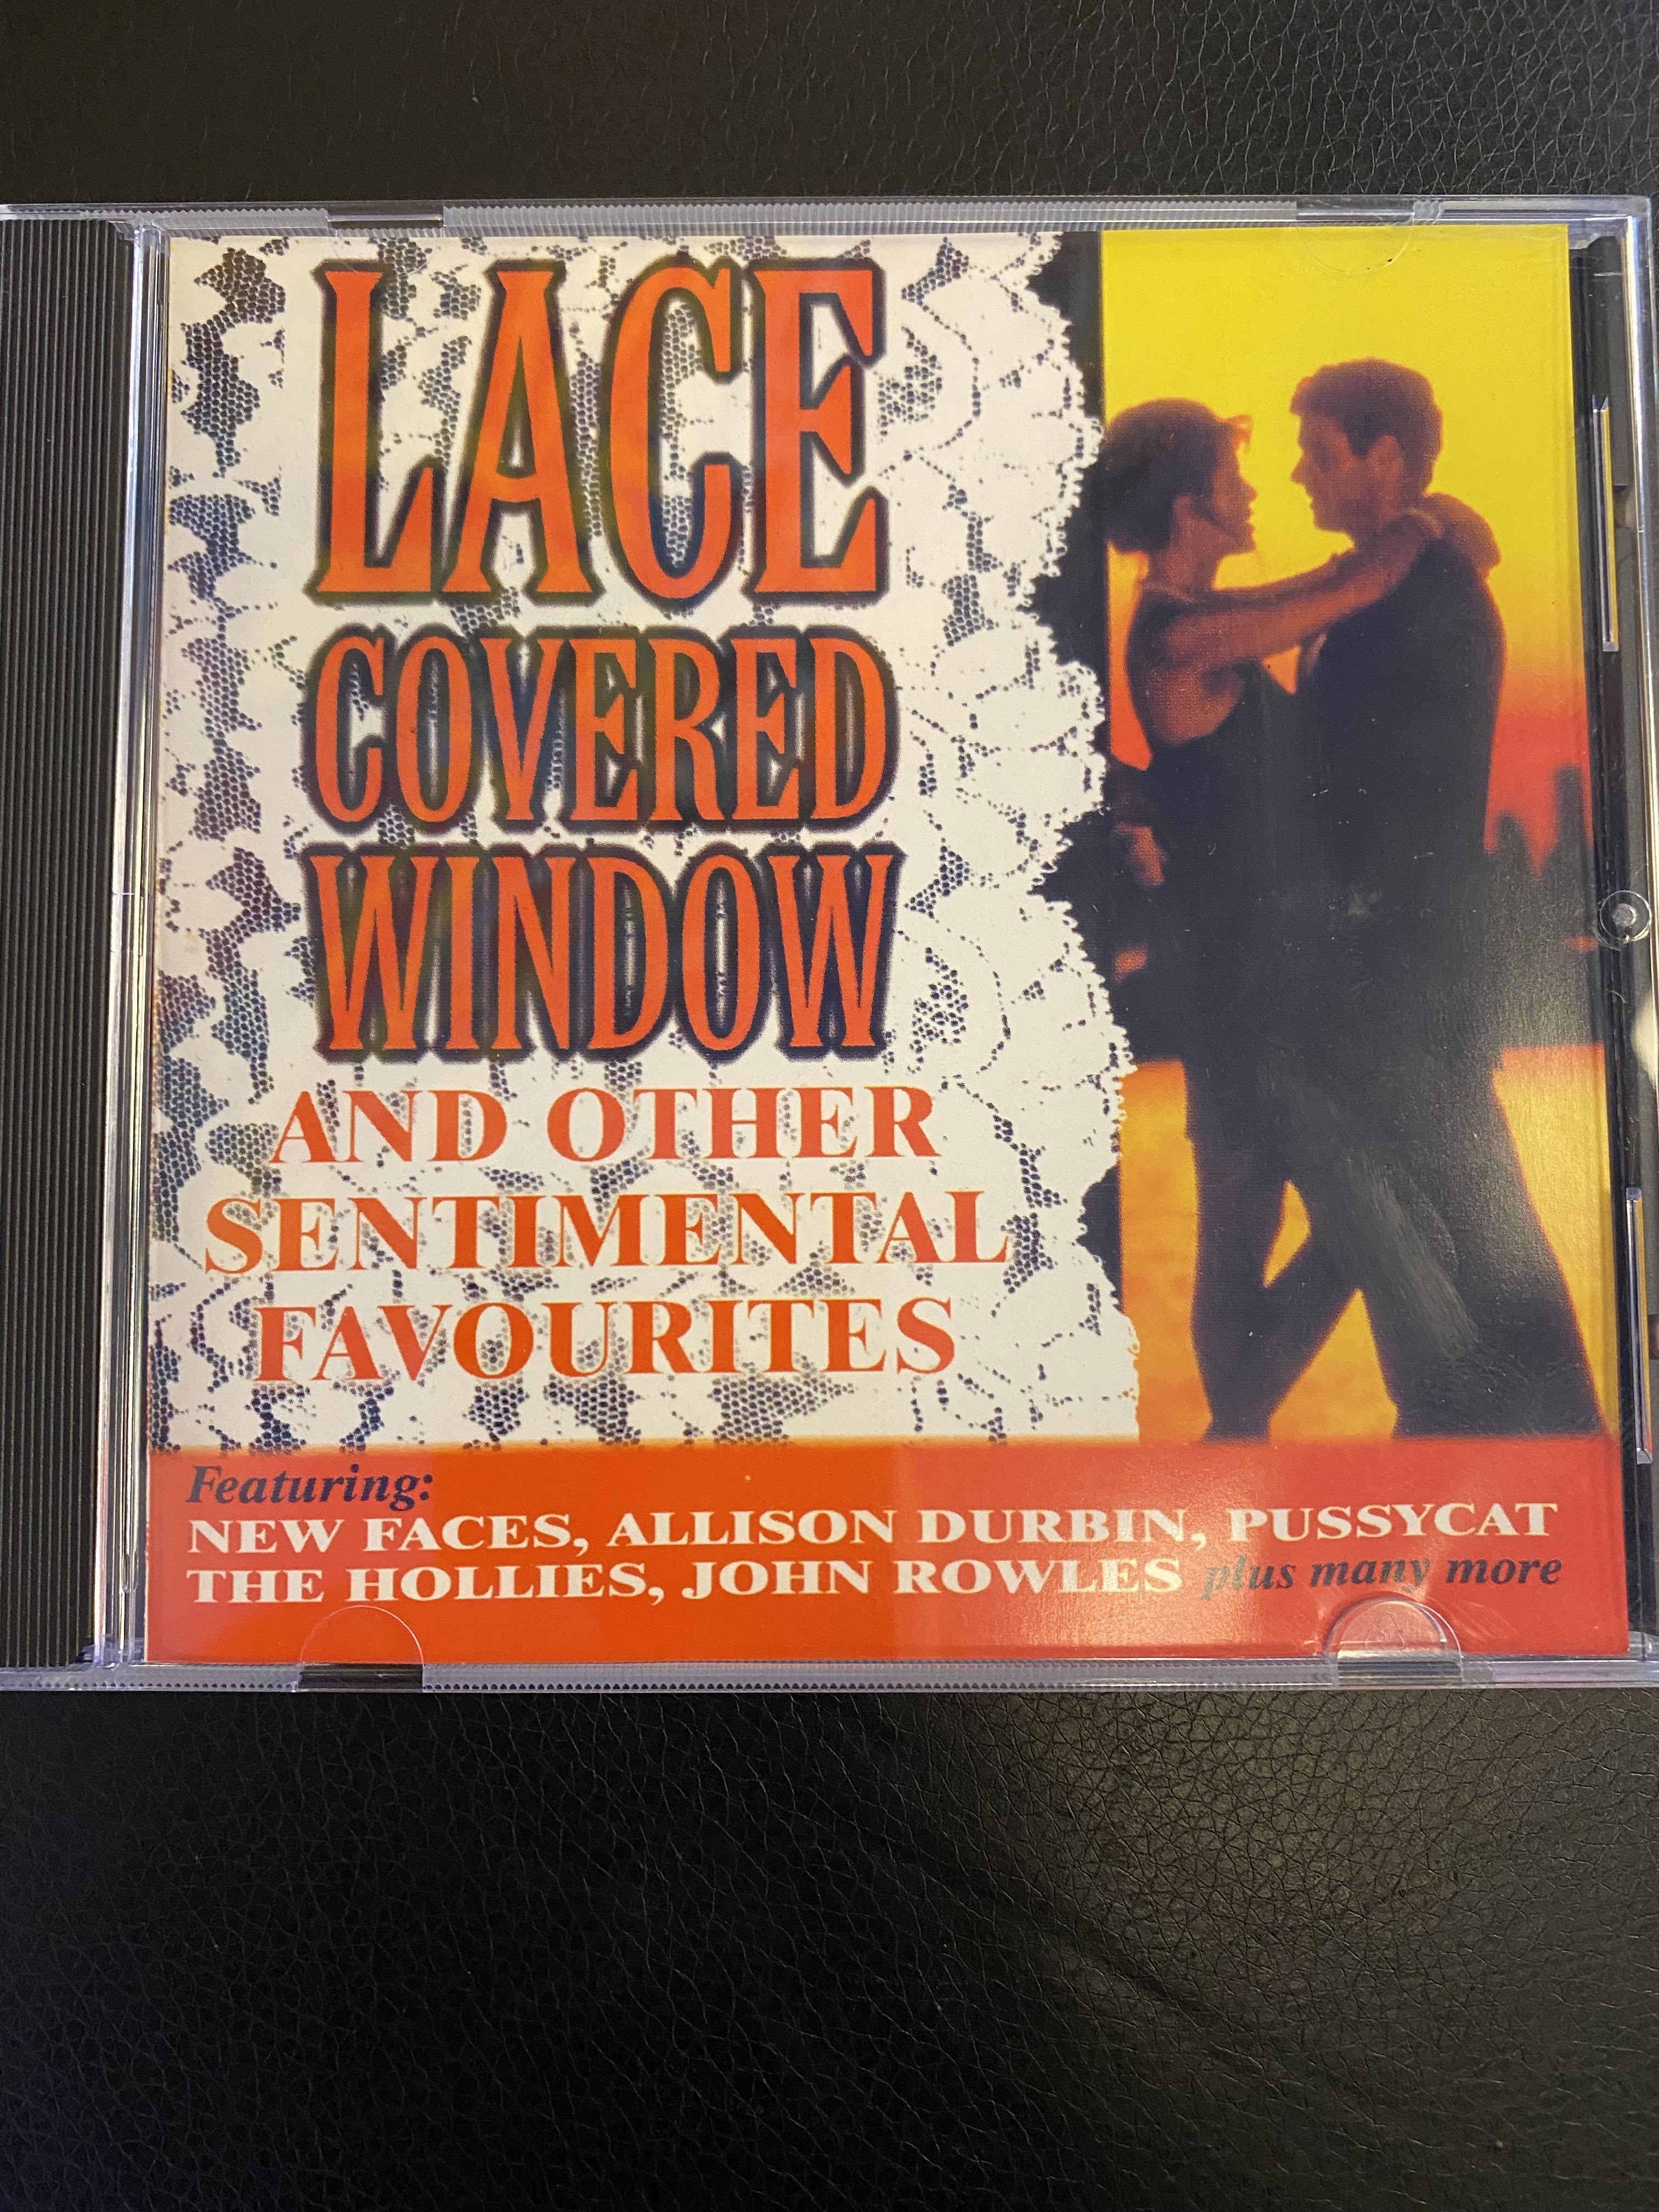 LACE COVERED WINDOW & OTHER SENTIMENTAL FAVOURITES-VARIOUS ARTISTS CD  VG